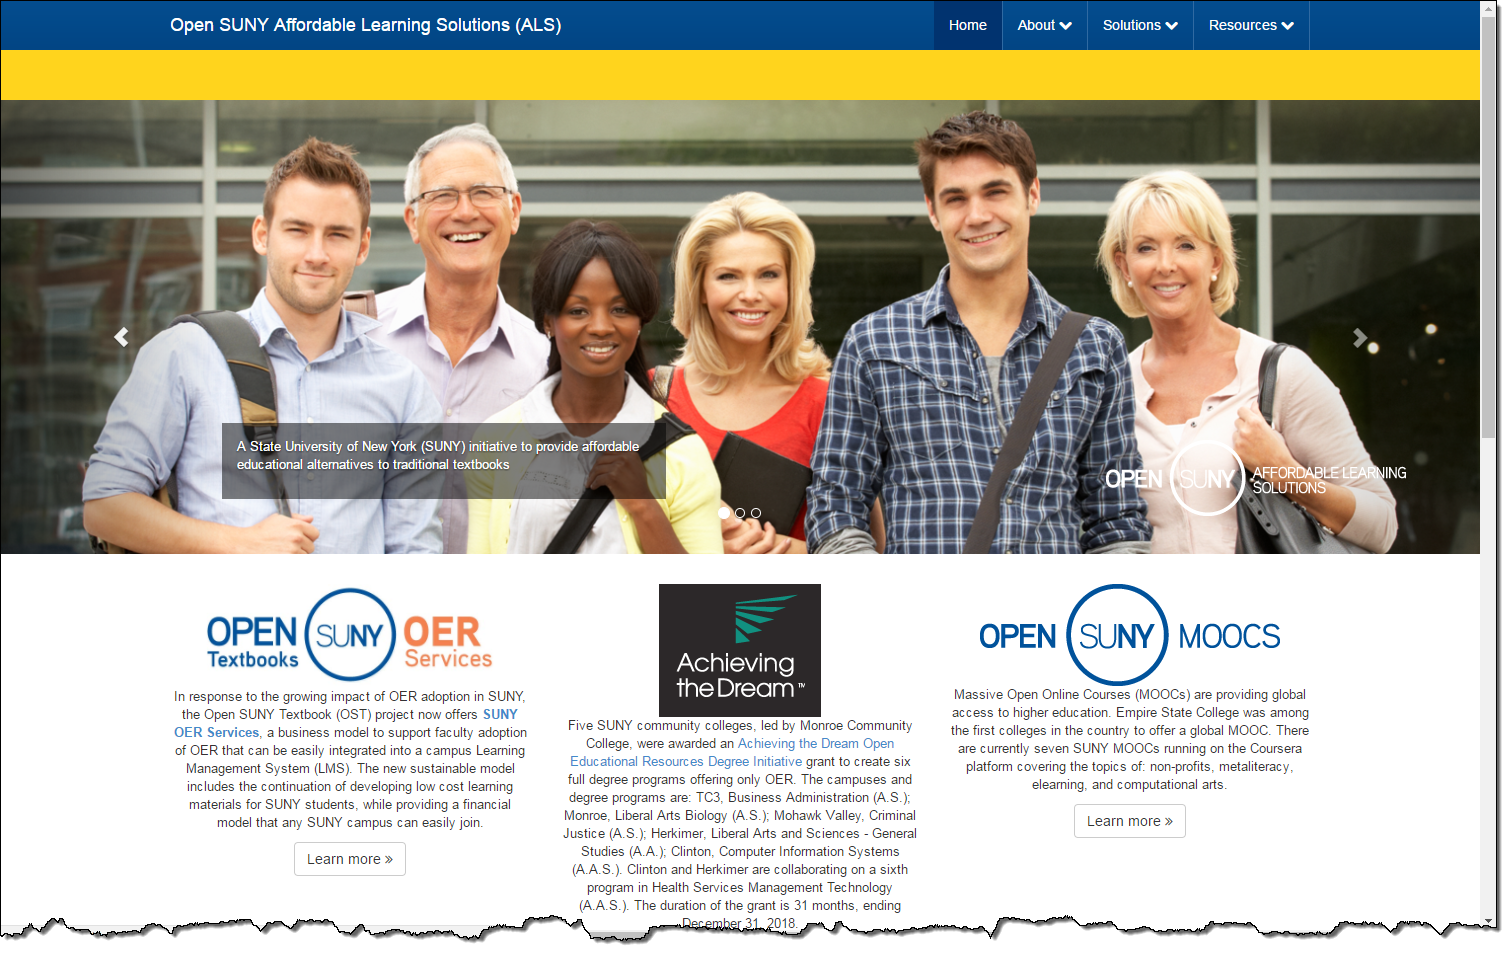 Screen shot of Open SUNY Affordable Learning Solutions home page